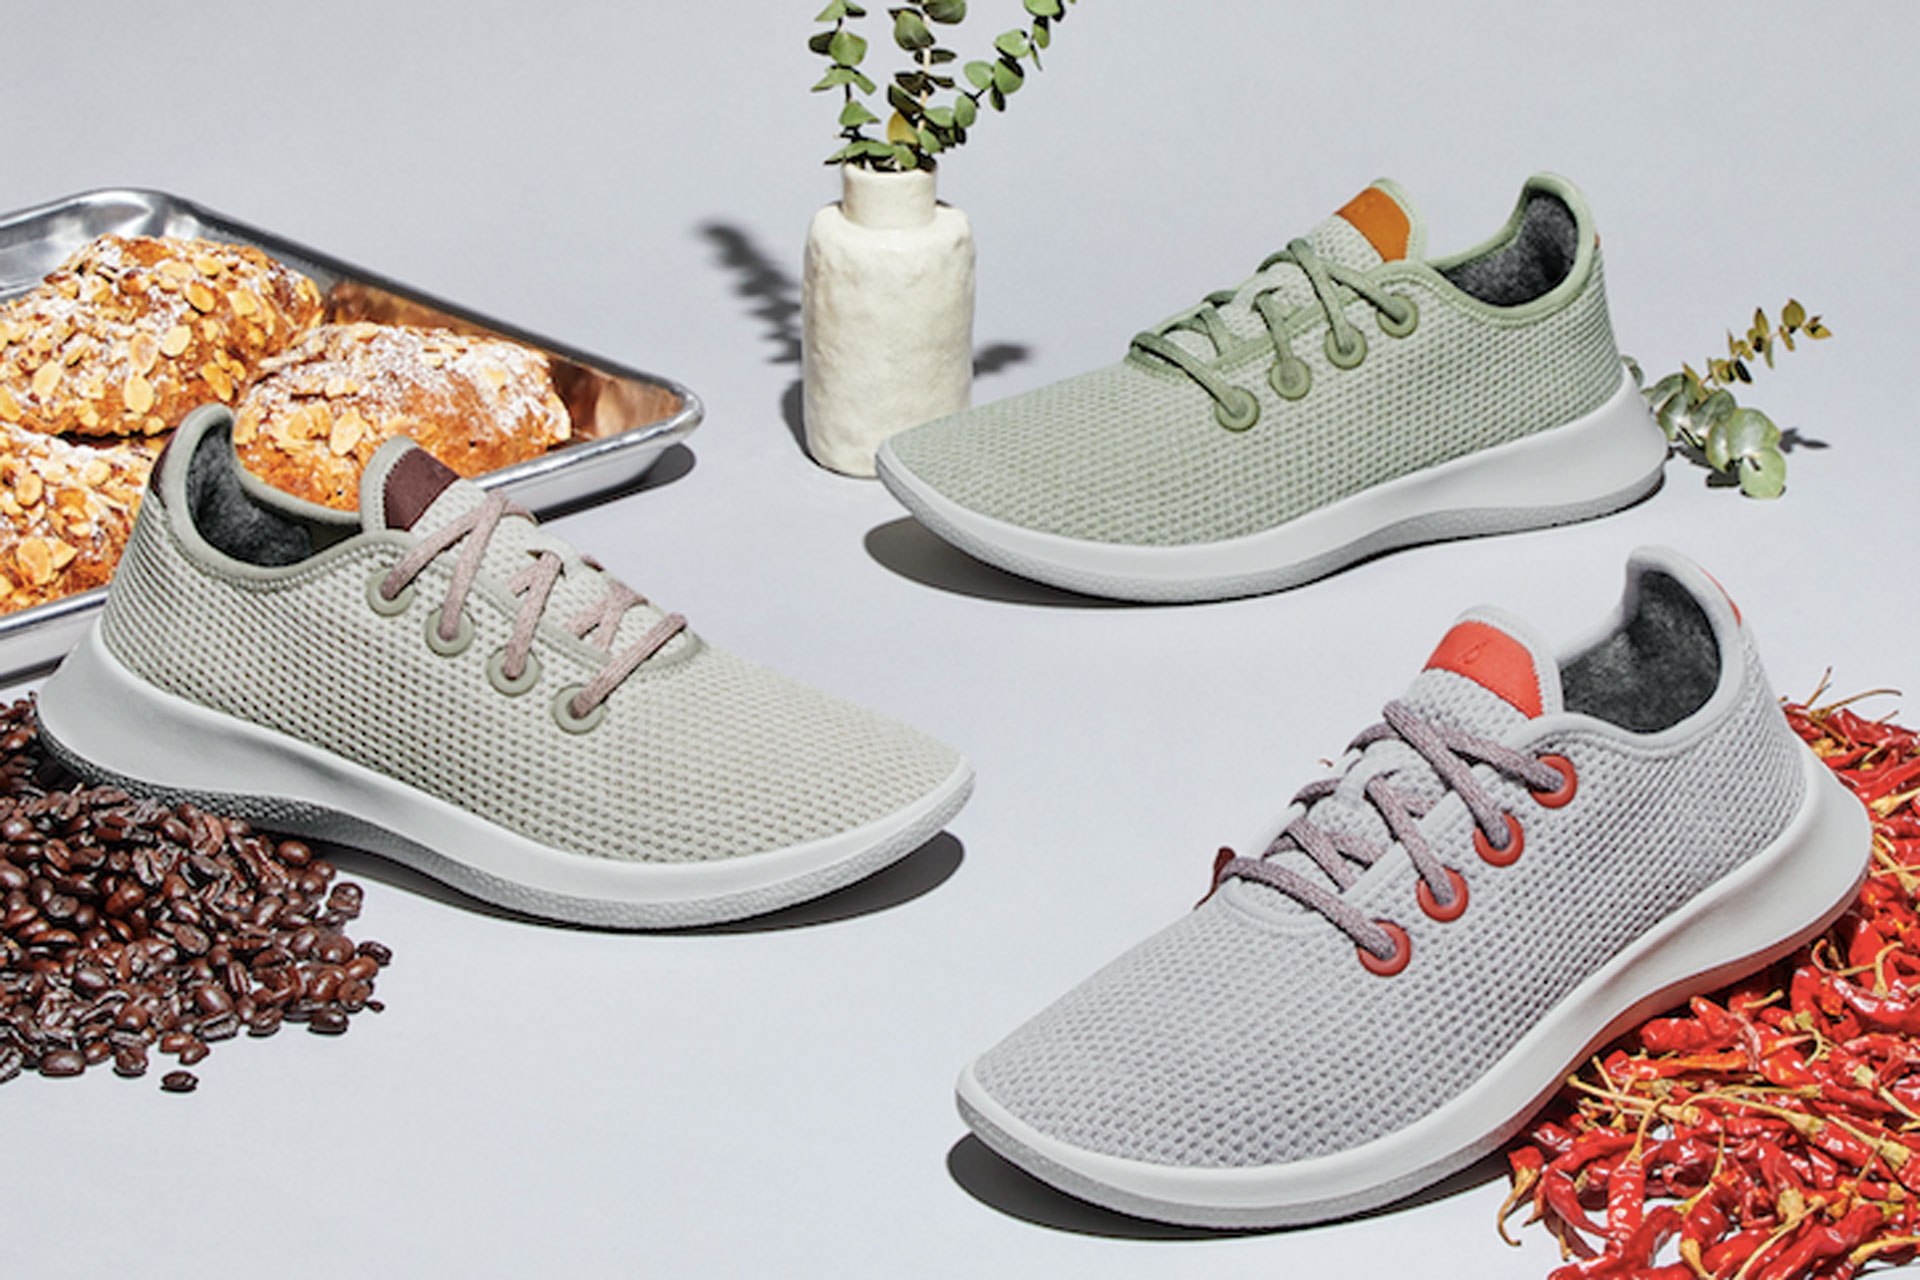 The sustainable sneaker brand set to 